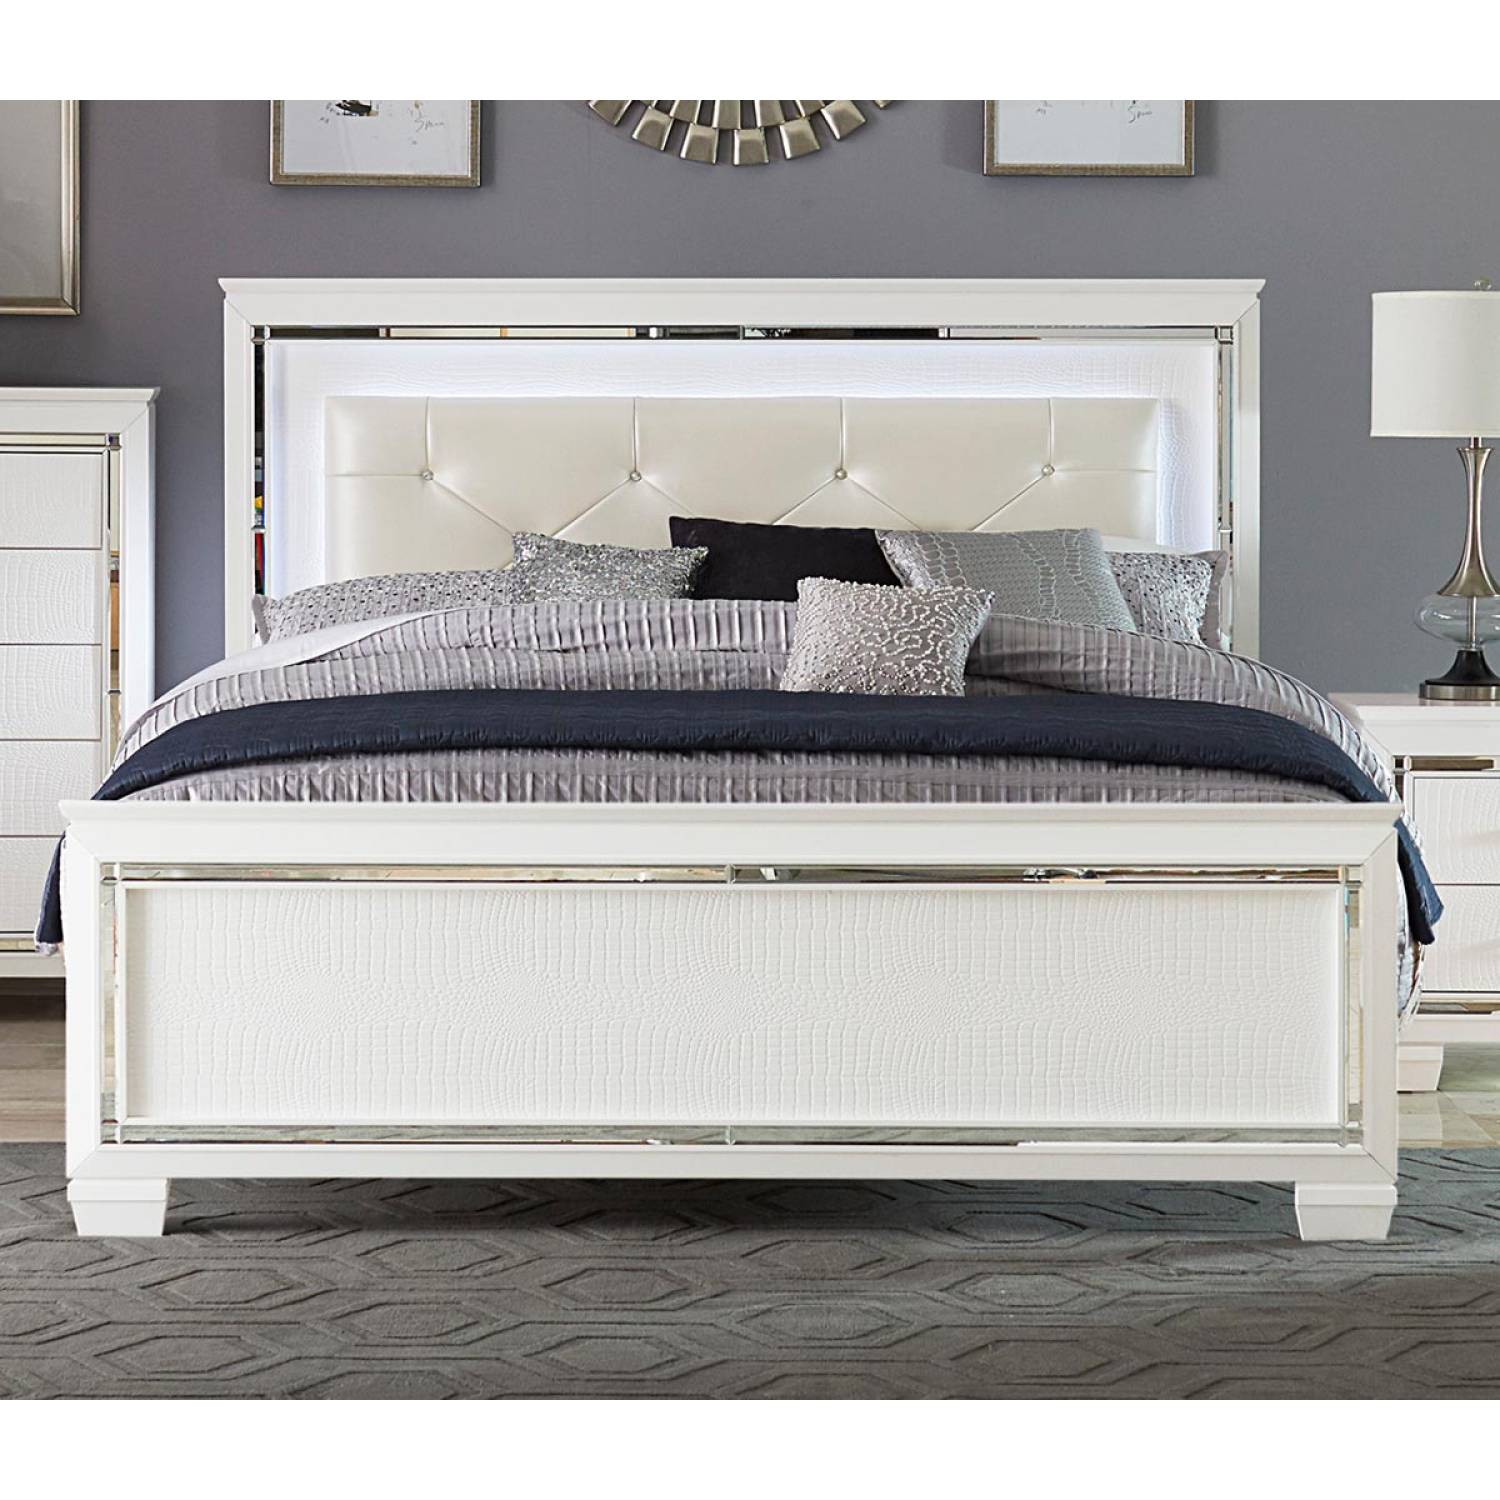 1916kw Ck Allura California King Bed, White Cal King Bed